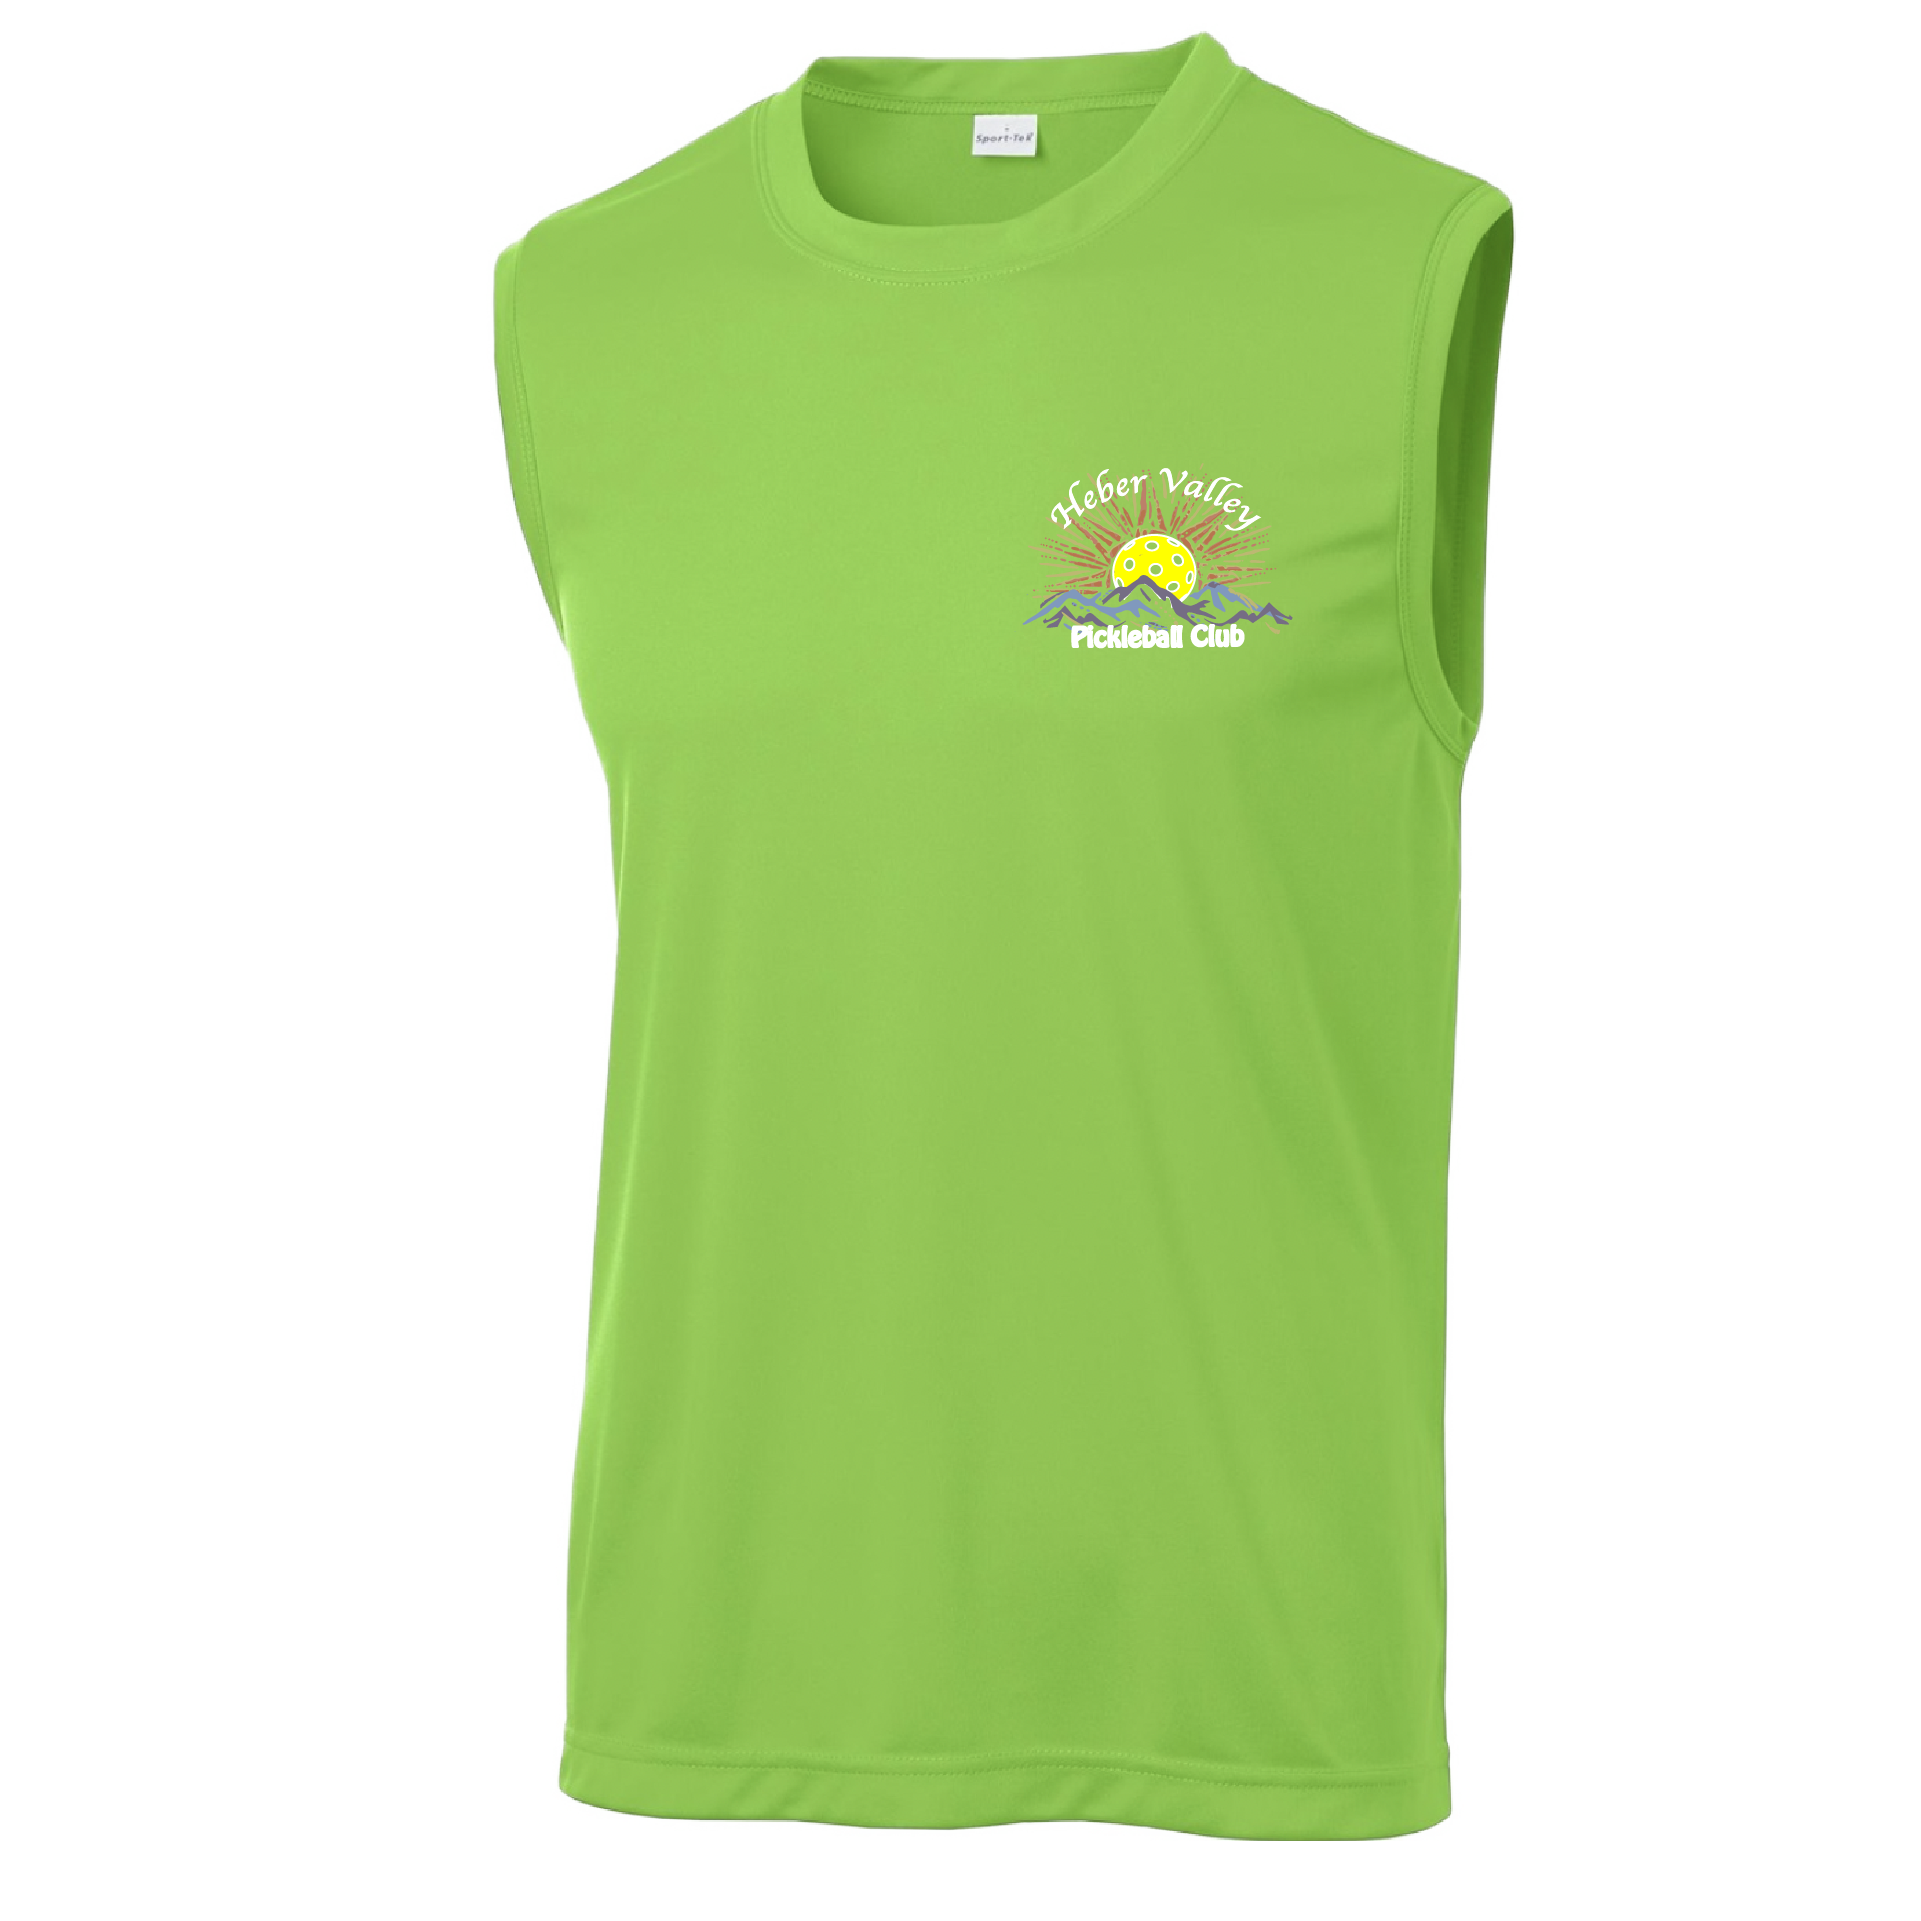 Pickleball Shirt Design: Heber Valley Pickleball Club  Men's Style: Sleeveless  Turn up the volume in this Men's shirt with its perfect mix of softness and attitude. Material is ultra-comfortable with moisture wicking properties and tri-blend softness. PosiCharge technology locks in color. Highly breathable and lightweight.